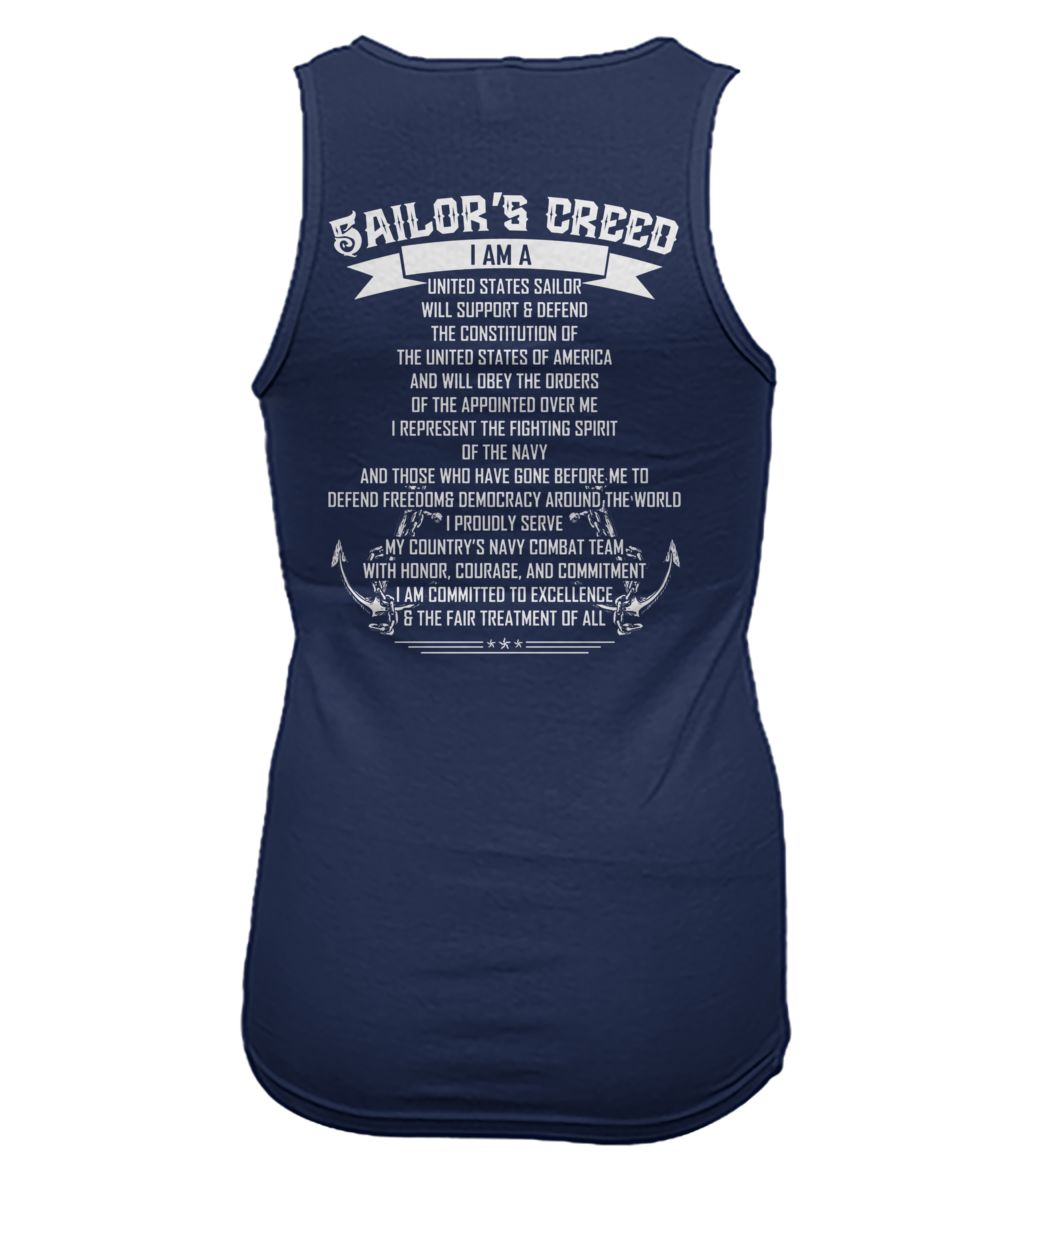 Sailor's creed I am a united states sailor women's tank top